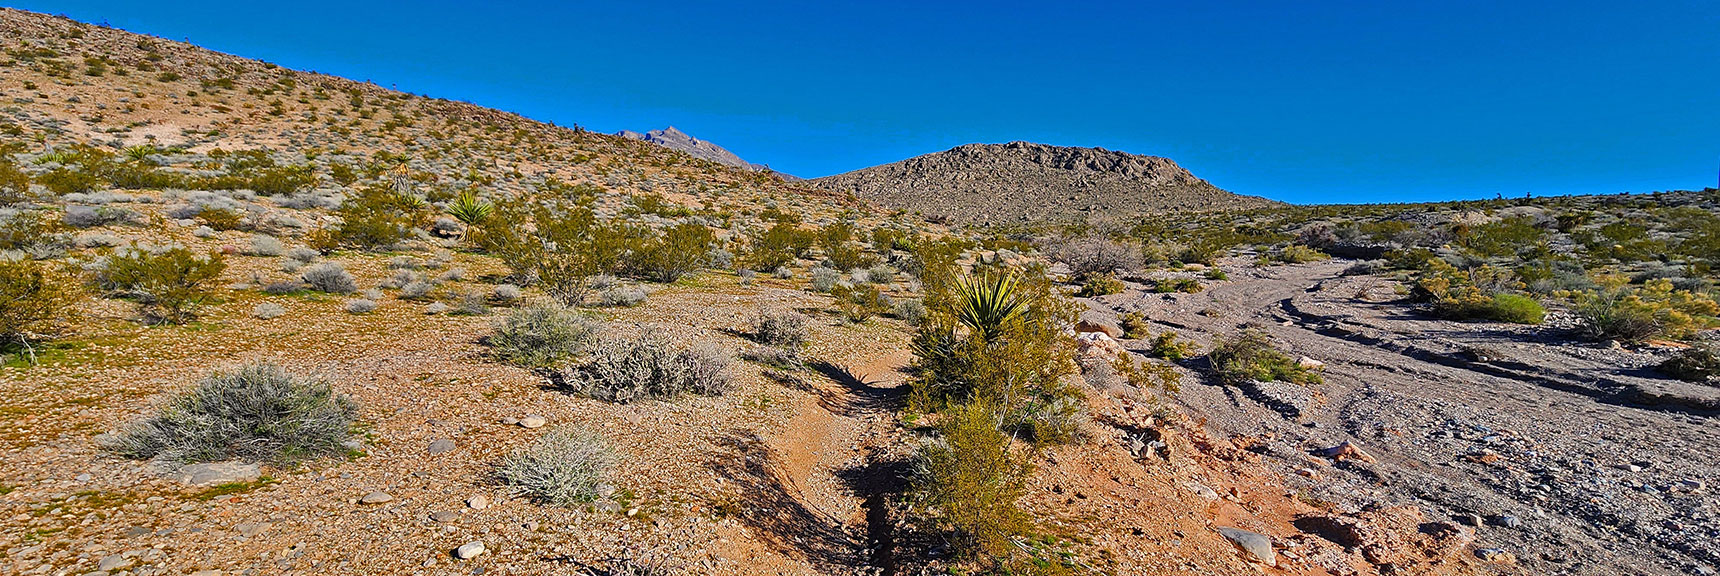 Half Wilson Trail Ends on a Brownstone Basin Wash. Round Right Side of Next Hill. | Gray Cap Ridge / Brownstone Basin Loop | La Madre Mountains Wilderness, Nevada